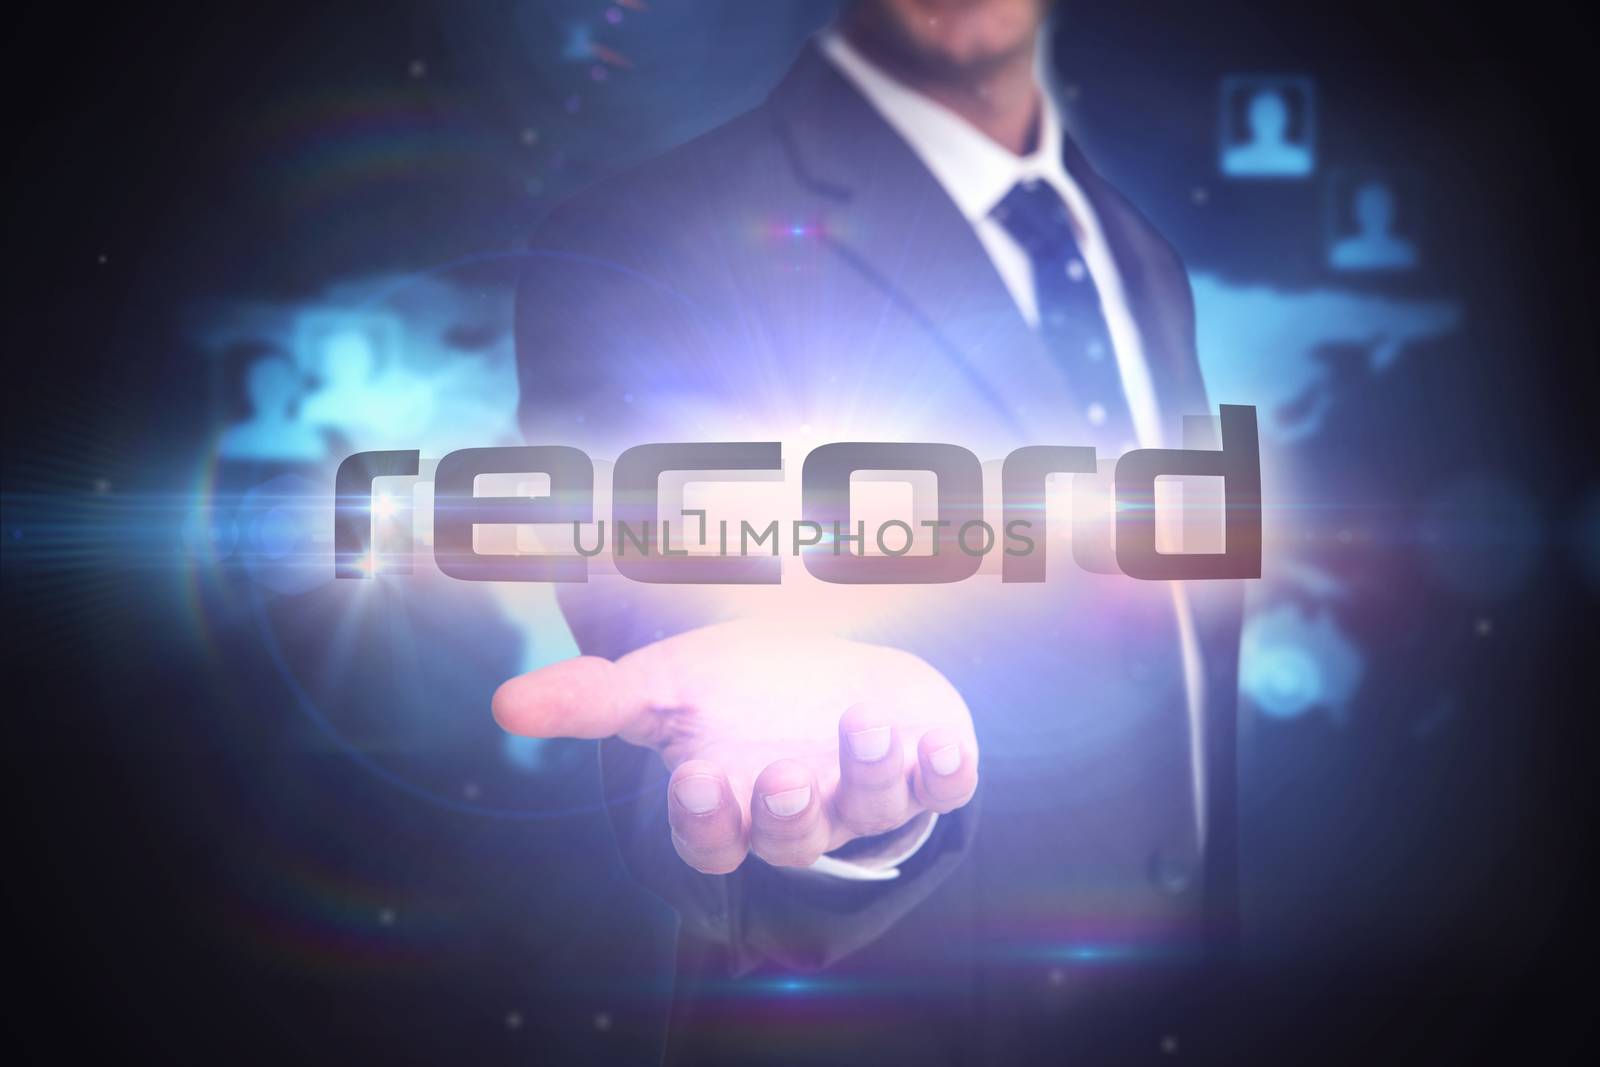 Record against futuristic technology interface by Wavebreakmedia